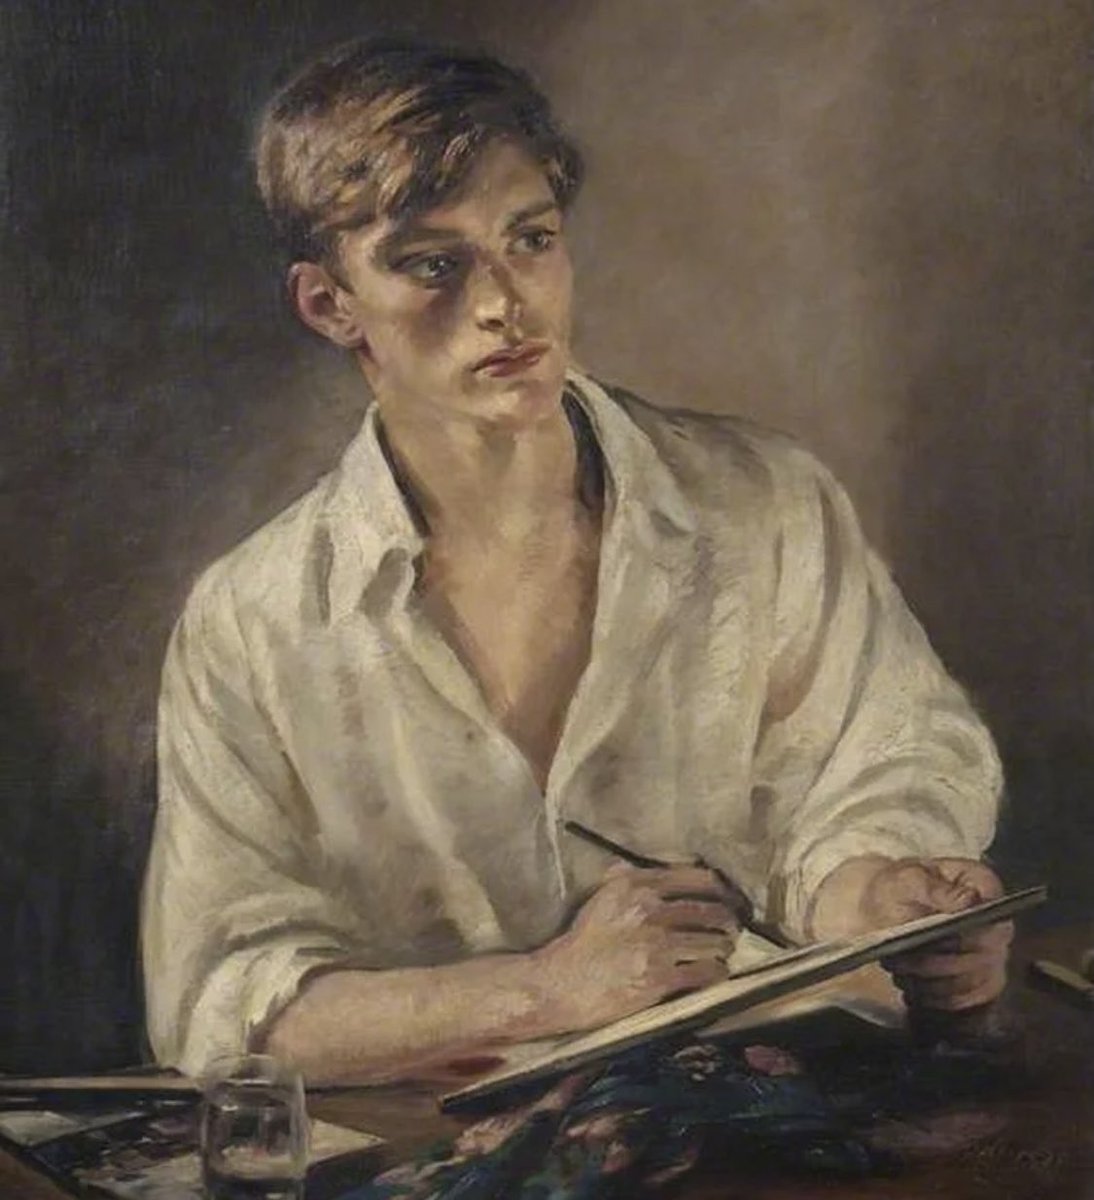 Cole as 𝚈𝚘𝚞𝚗𝚐 𝚖𝚊𝚗 𝚜𝚔𝚎𝚝𝚌𝚑𝚒𝚗𝚐 by William Bruce Ellis Ranken: the painting shows a young man absorbed into art, probably taking inspiration from his surroundings to create art himself. It can be seen as Meta art (art within art)